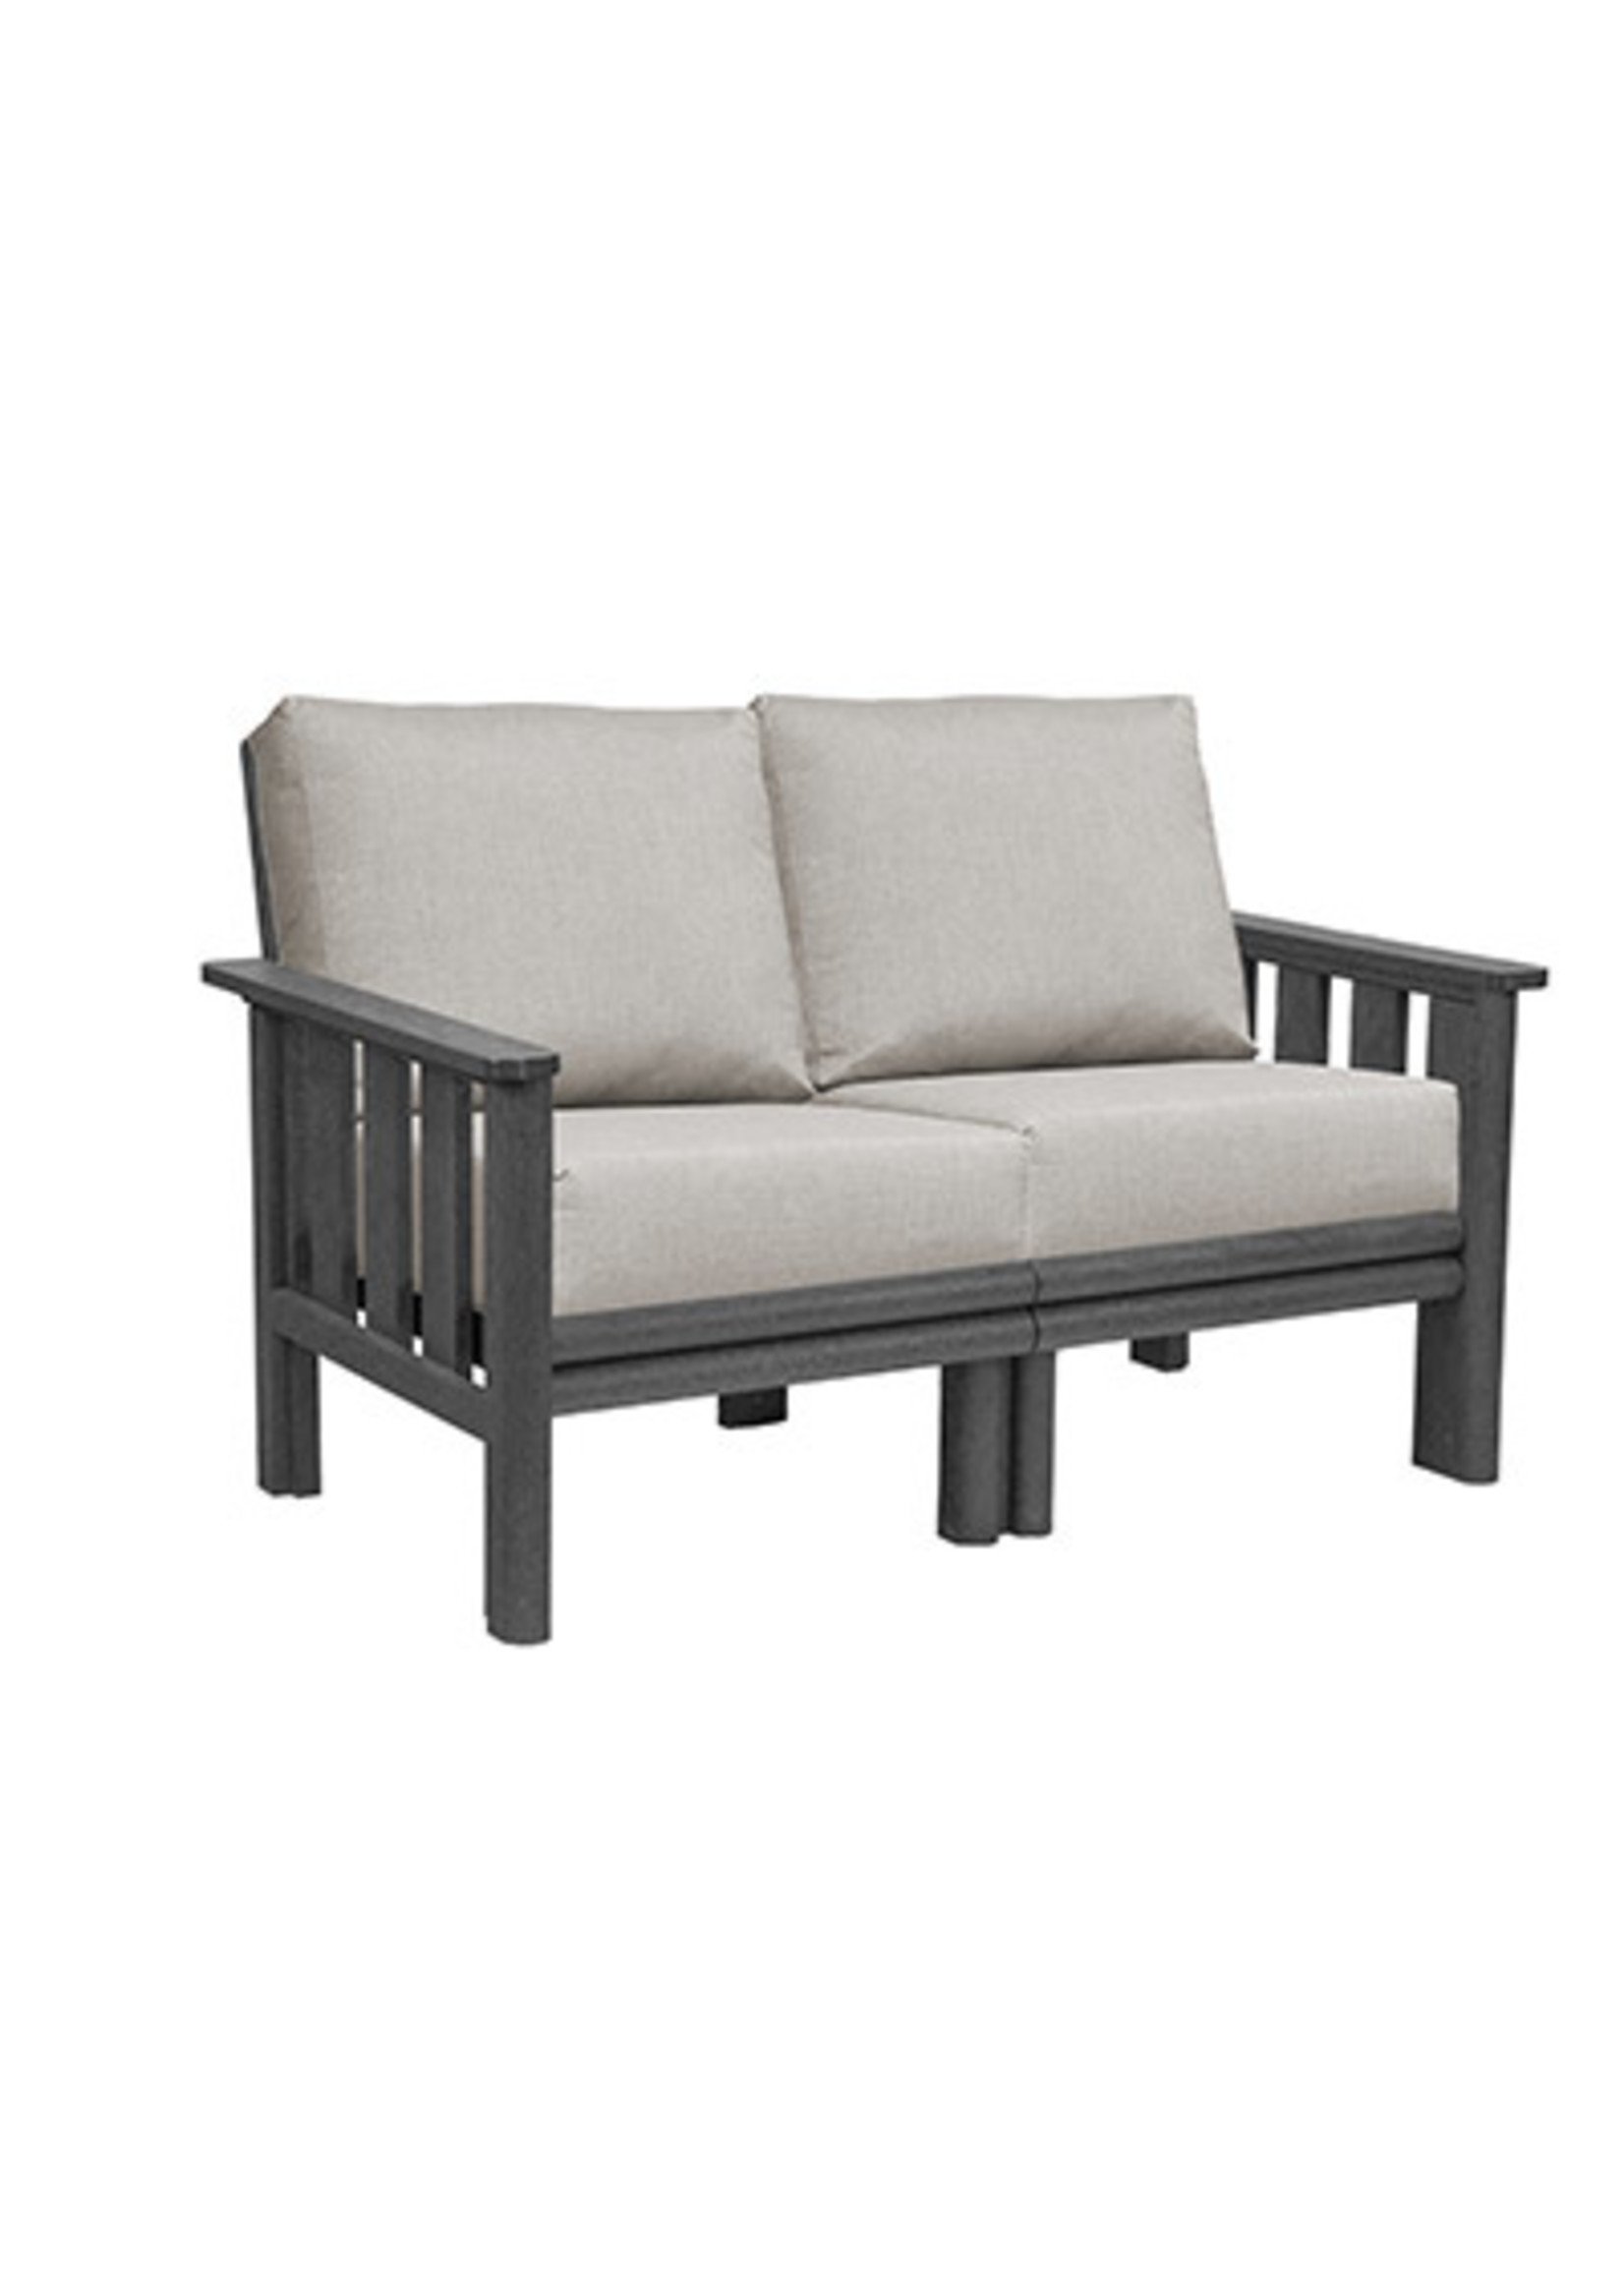 C.R. Plastic Products DSF262 * Stratford Loveseat